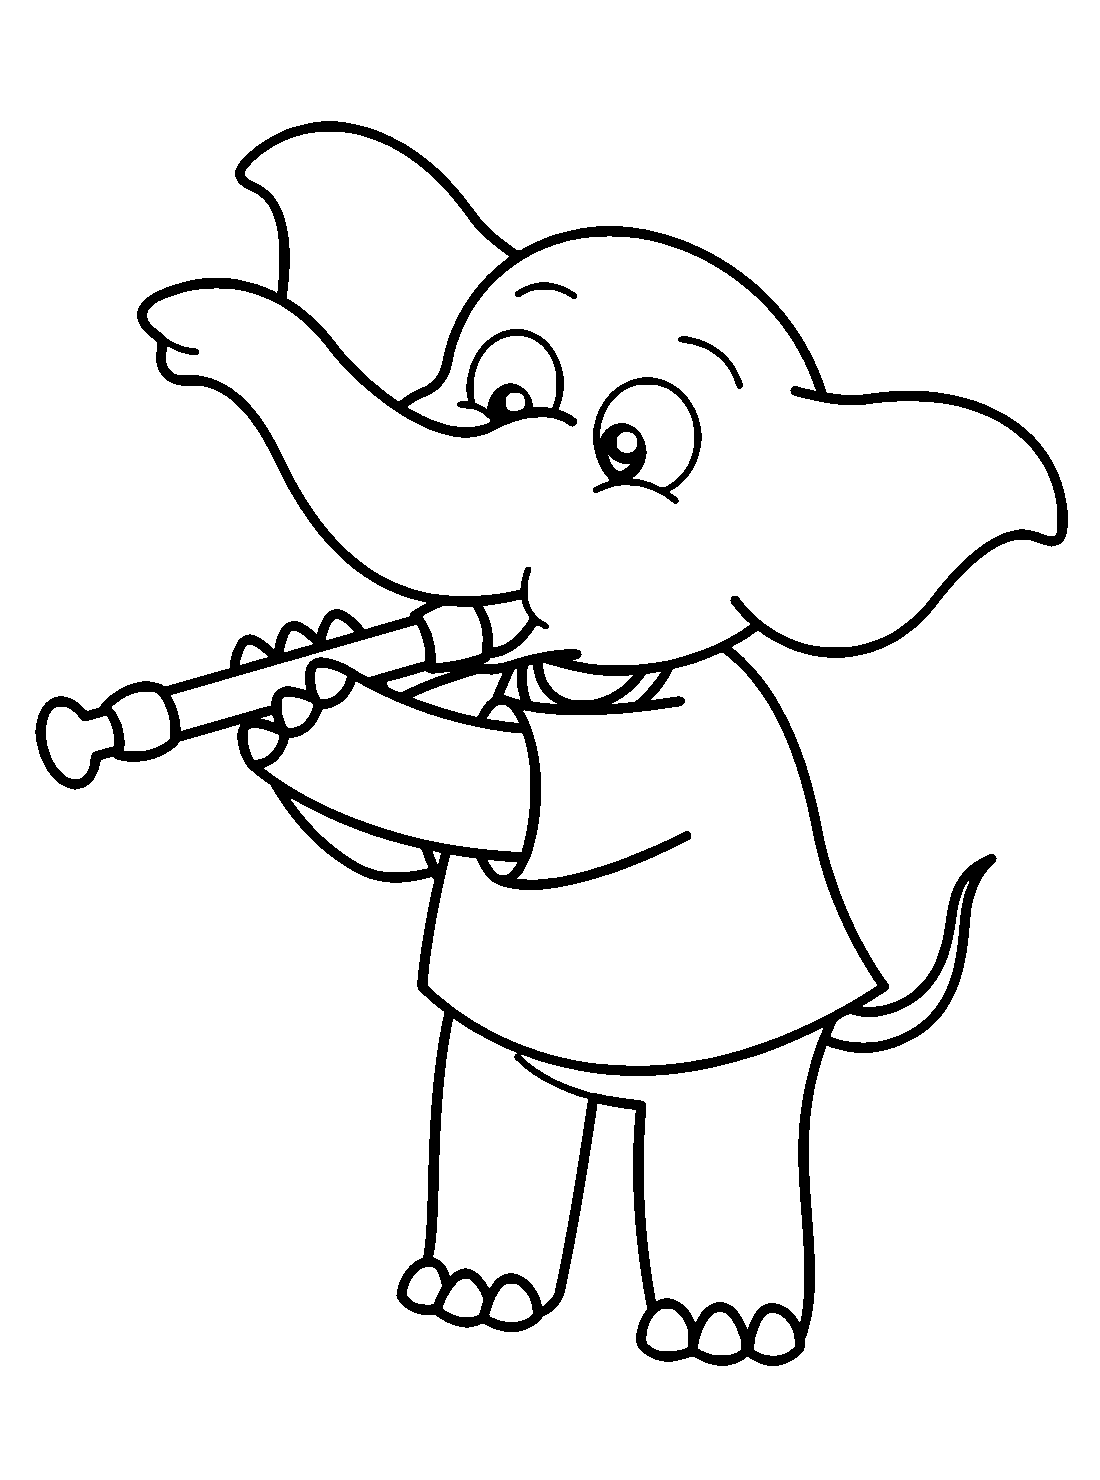 Cute elephant with flute